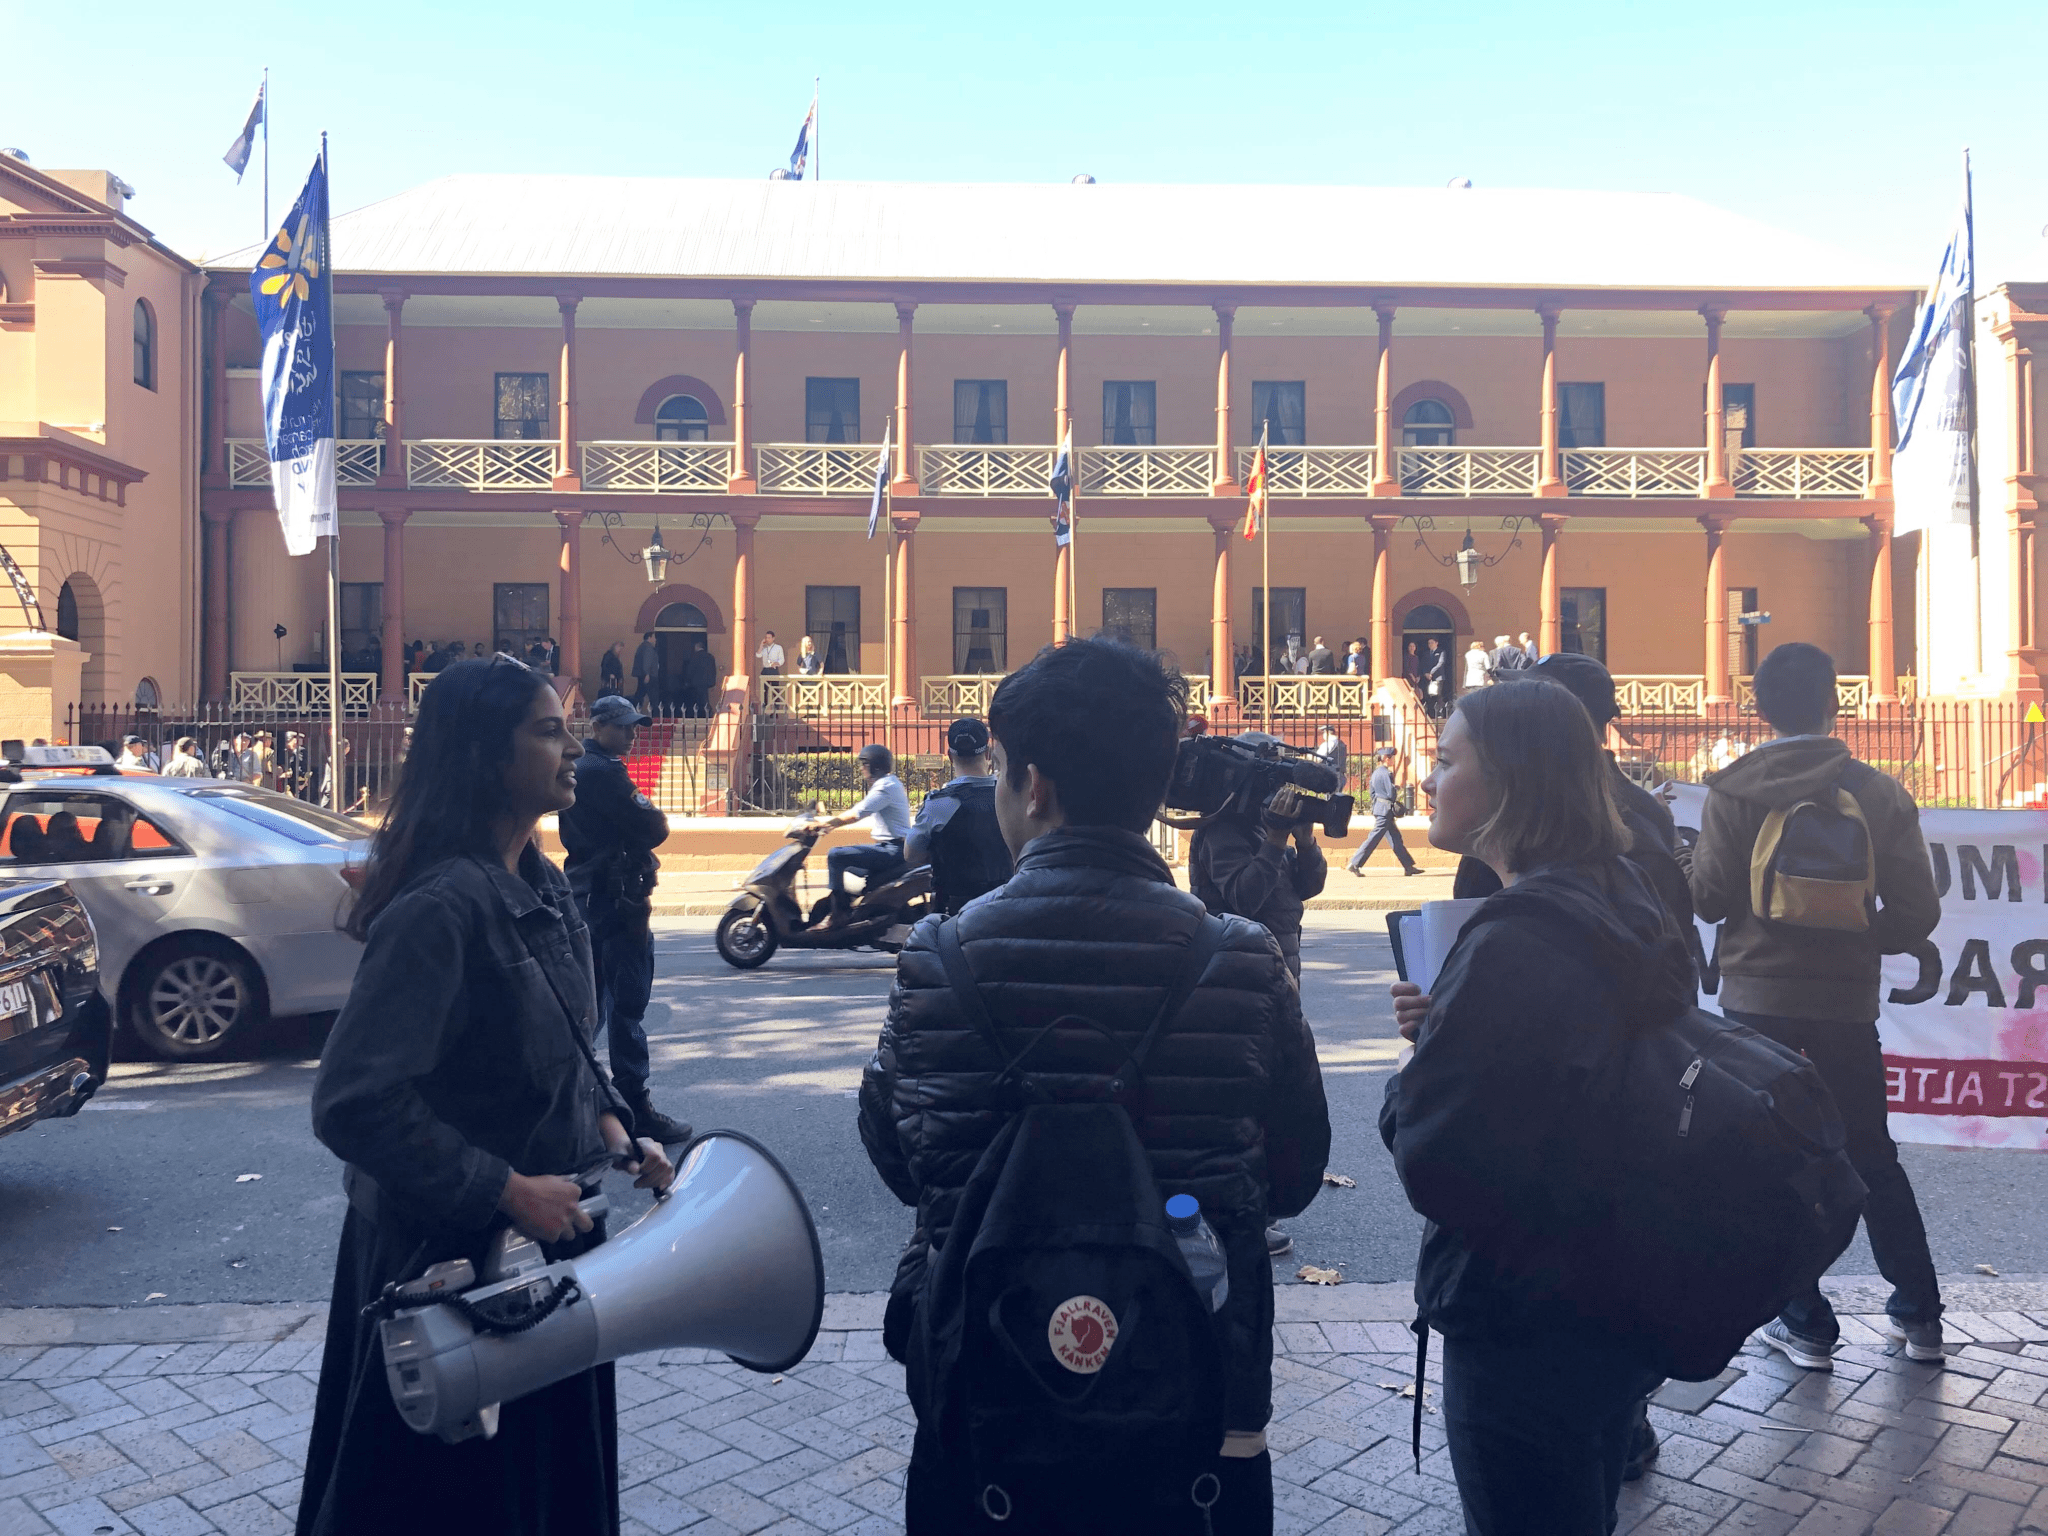 Activists Hersha Kadkol, Connor Parissis and Maddie Clark stand in front of the NSW State Parliament building.